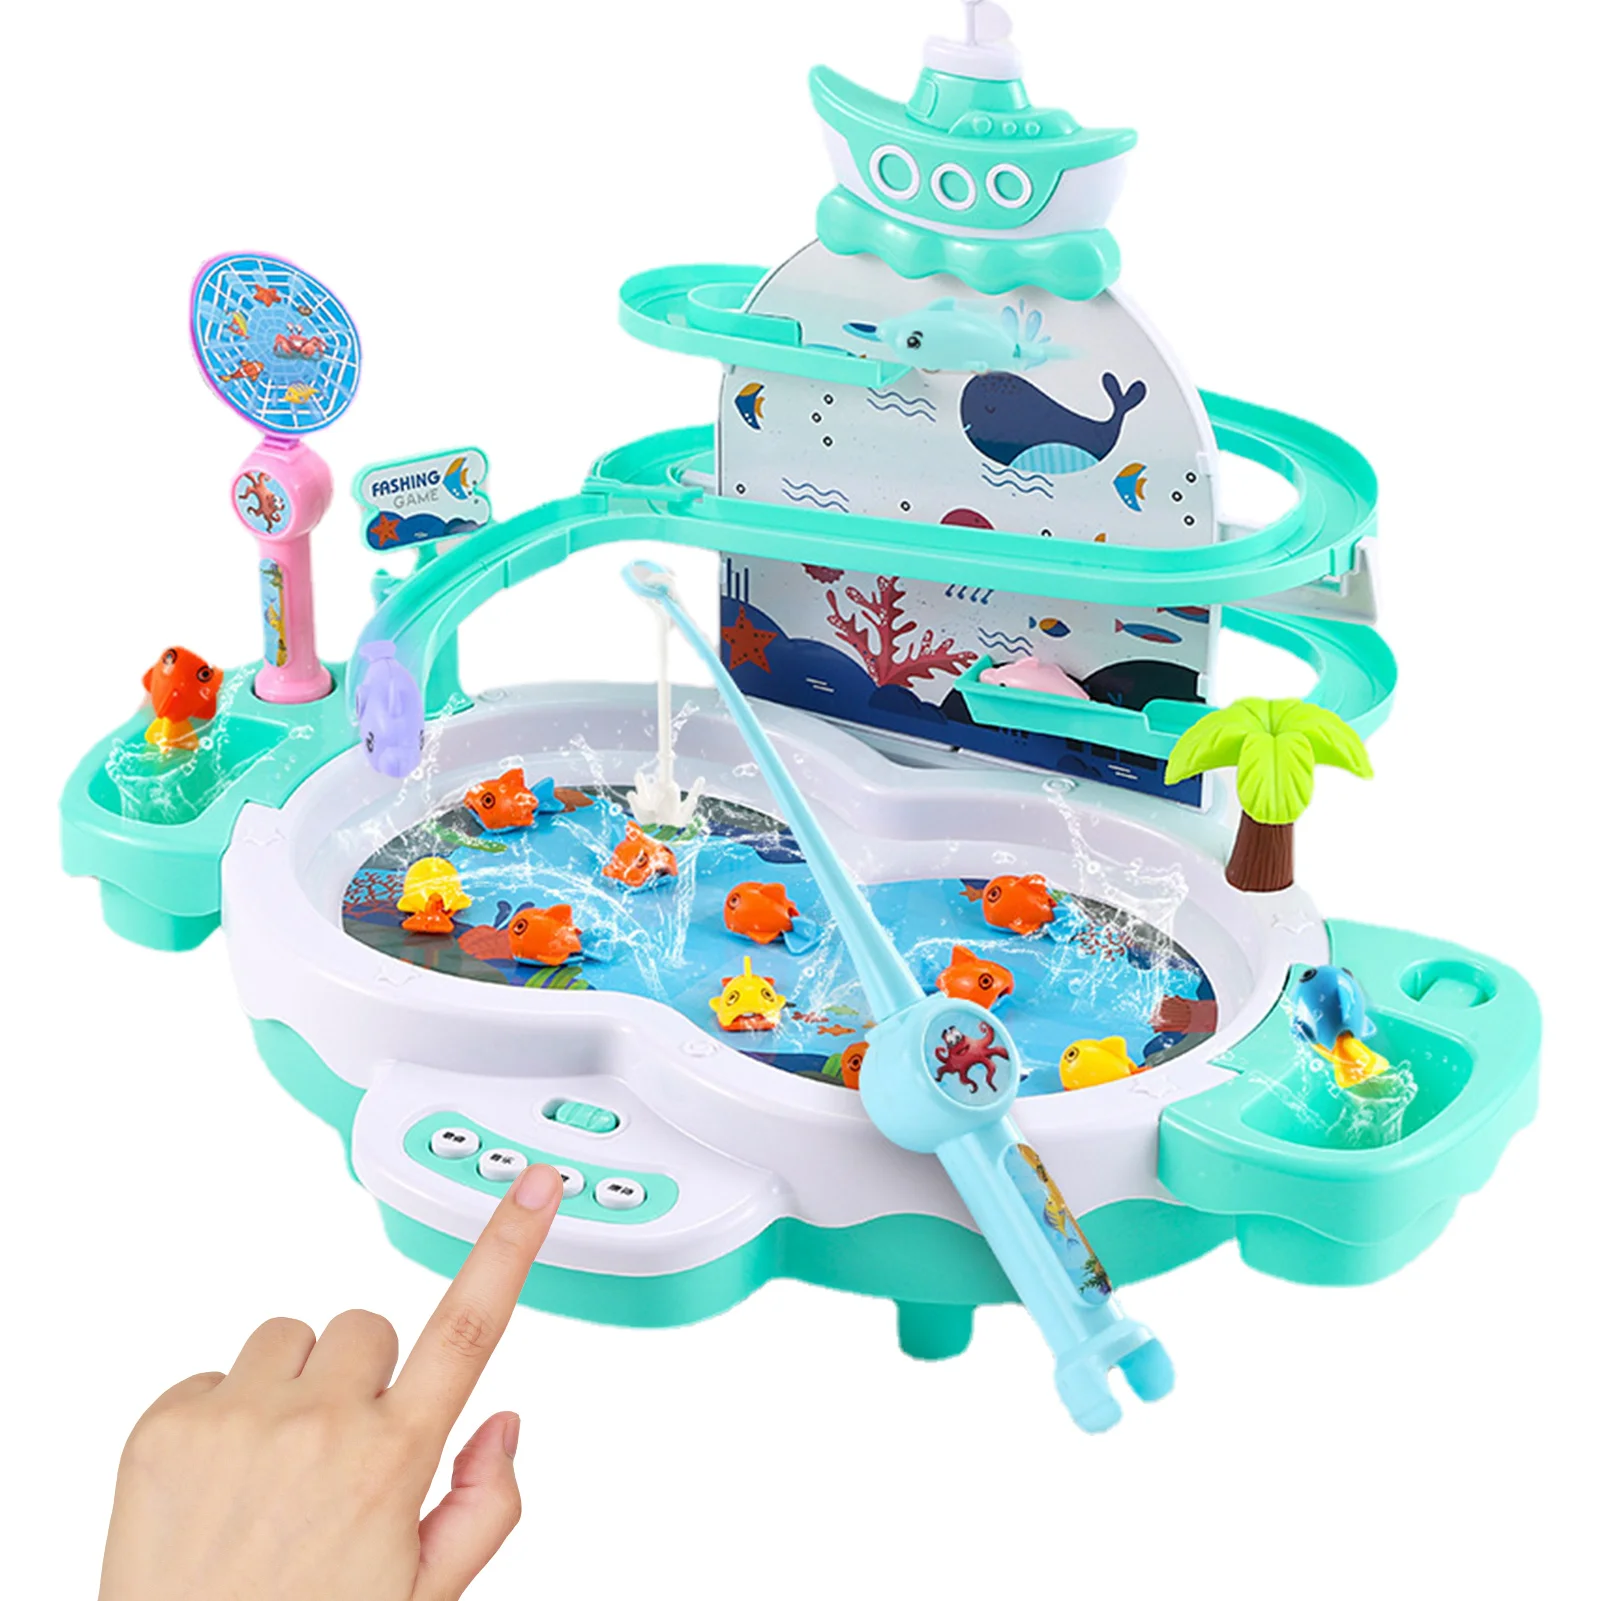 

Pole And Rod Fish Toy 2 In1 Magnet Fishing Game Toy Set With Music And Light Electric Kids Pool Fishing Toy Educational Safe Toy